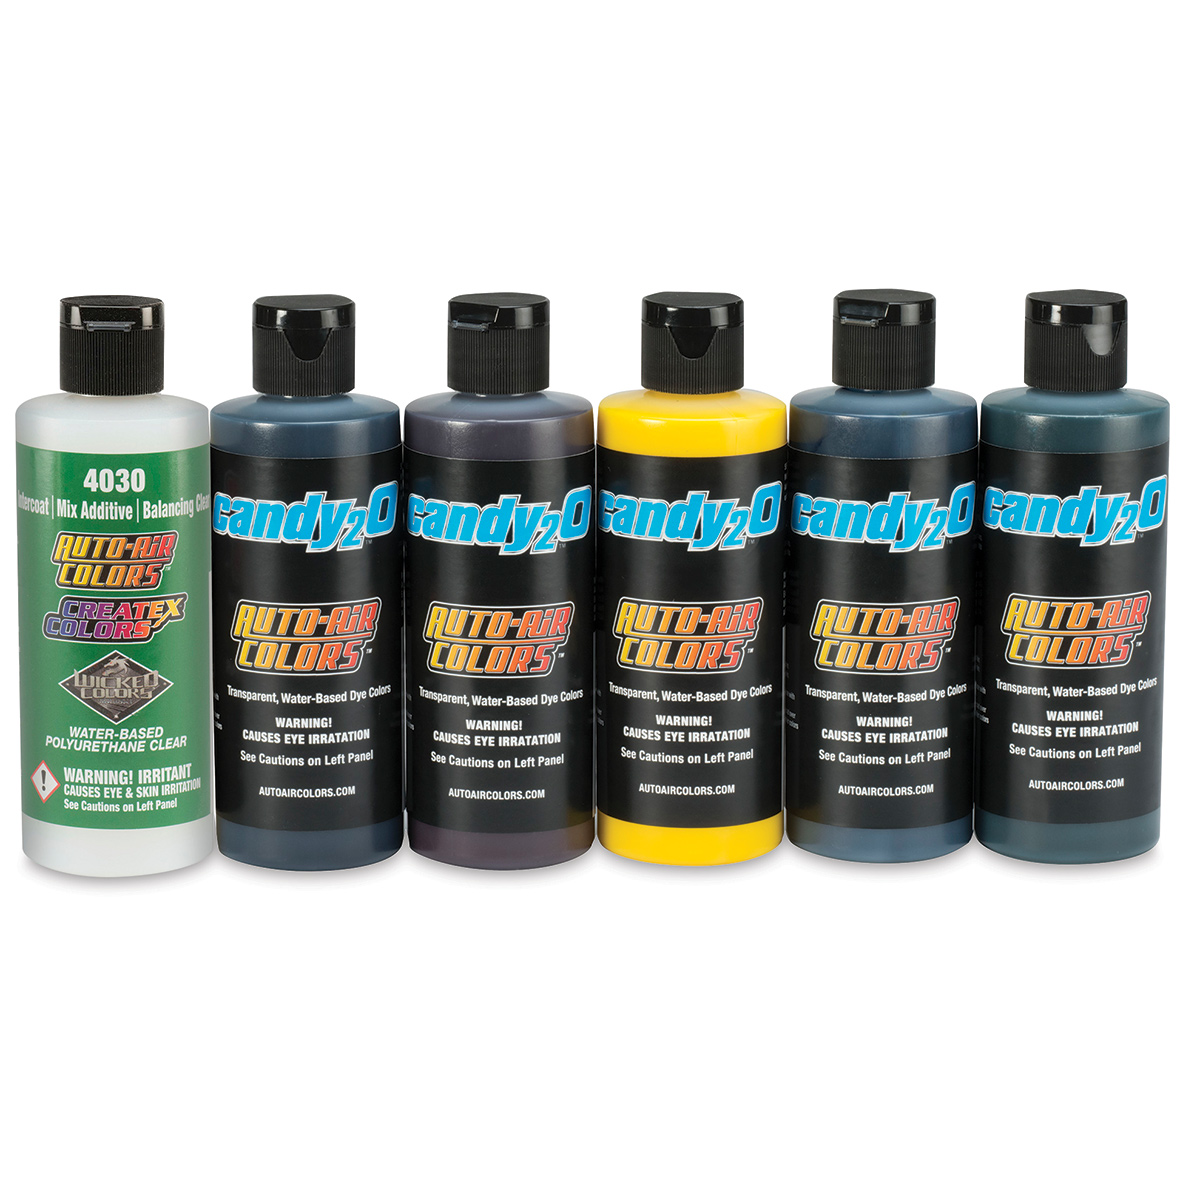 Candy2o Complete Master Set custom paints by Createx Auto-Air Colors 2oz 